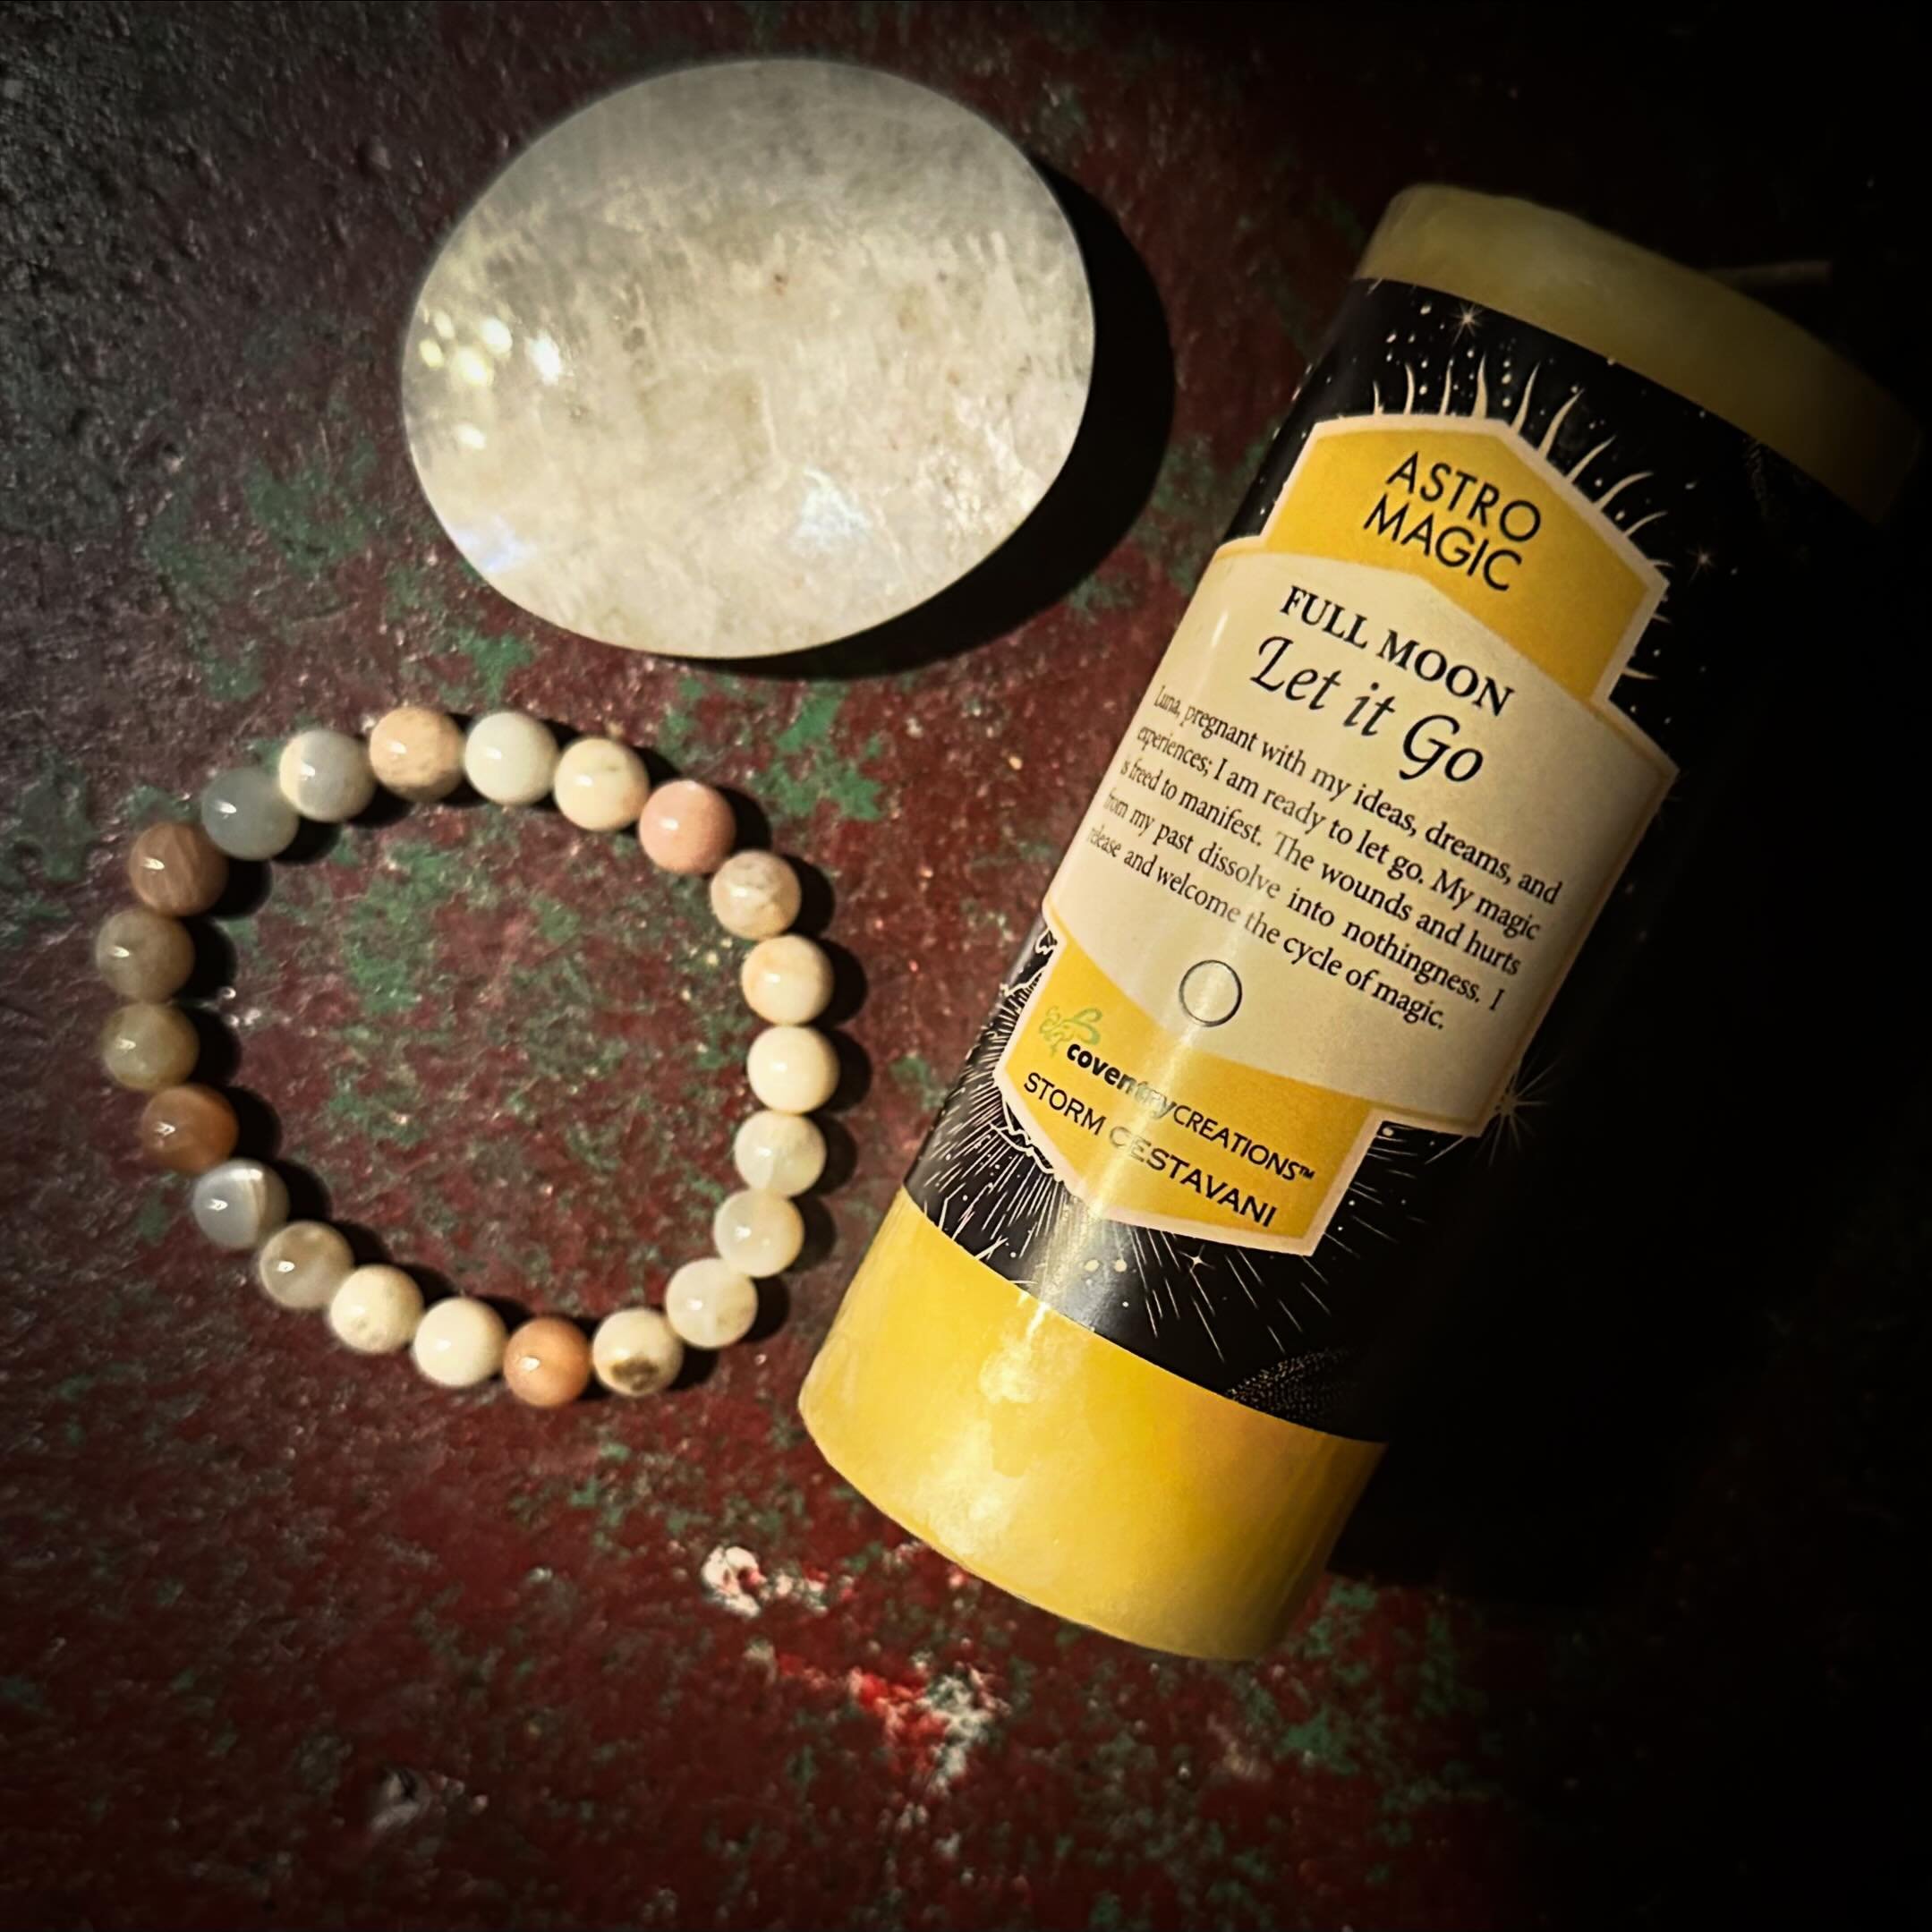 ✨🌕✨Moon Magic🌕✨🌕
Light a moon candle, wear moonstone or put moonstone in your space and practice letting go&hellip;&hellip;&hellip;✨
&bull;
&bull;
&bull;
🌕Come by The Vajra in Seattle 12-6🌕✨🌕
&bull;
&bull;
&bull;
#thevajra #thevajraseattle #vaj